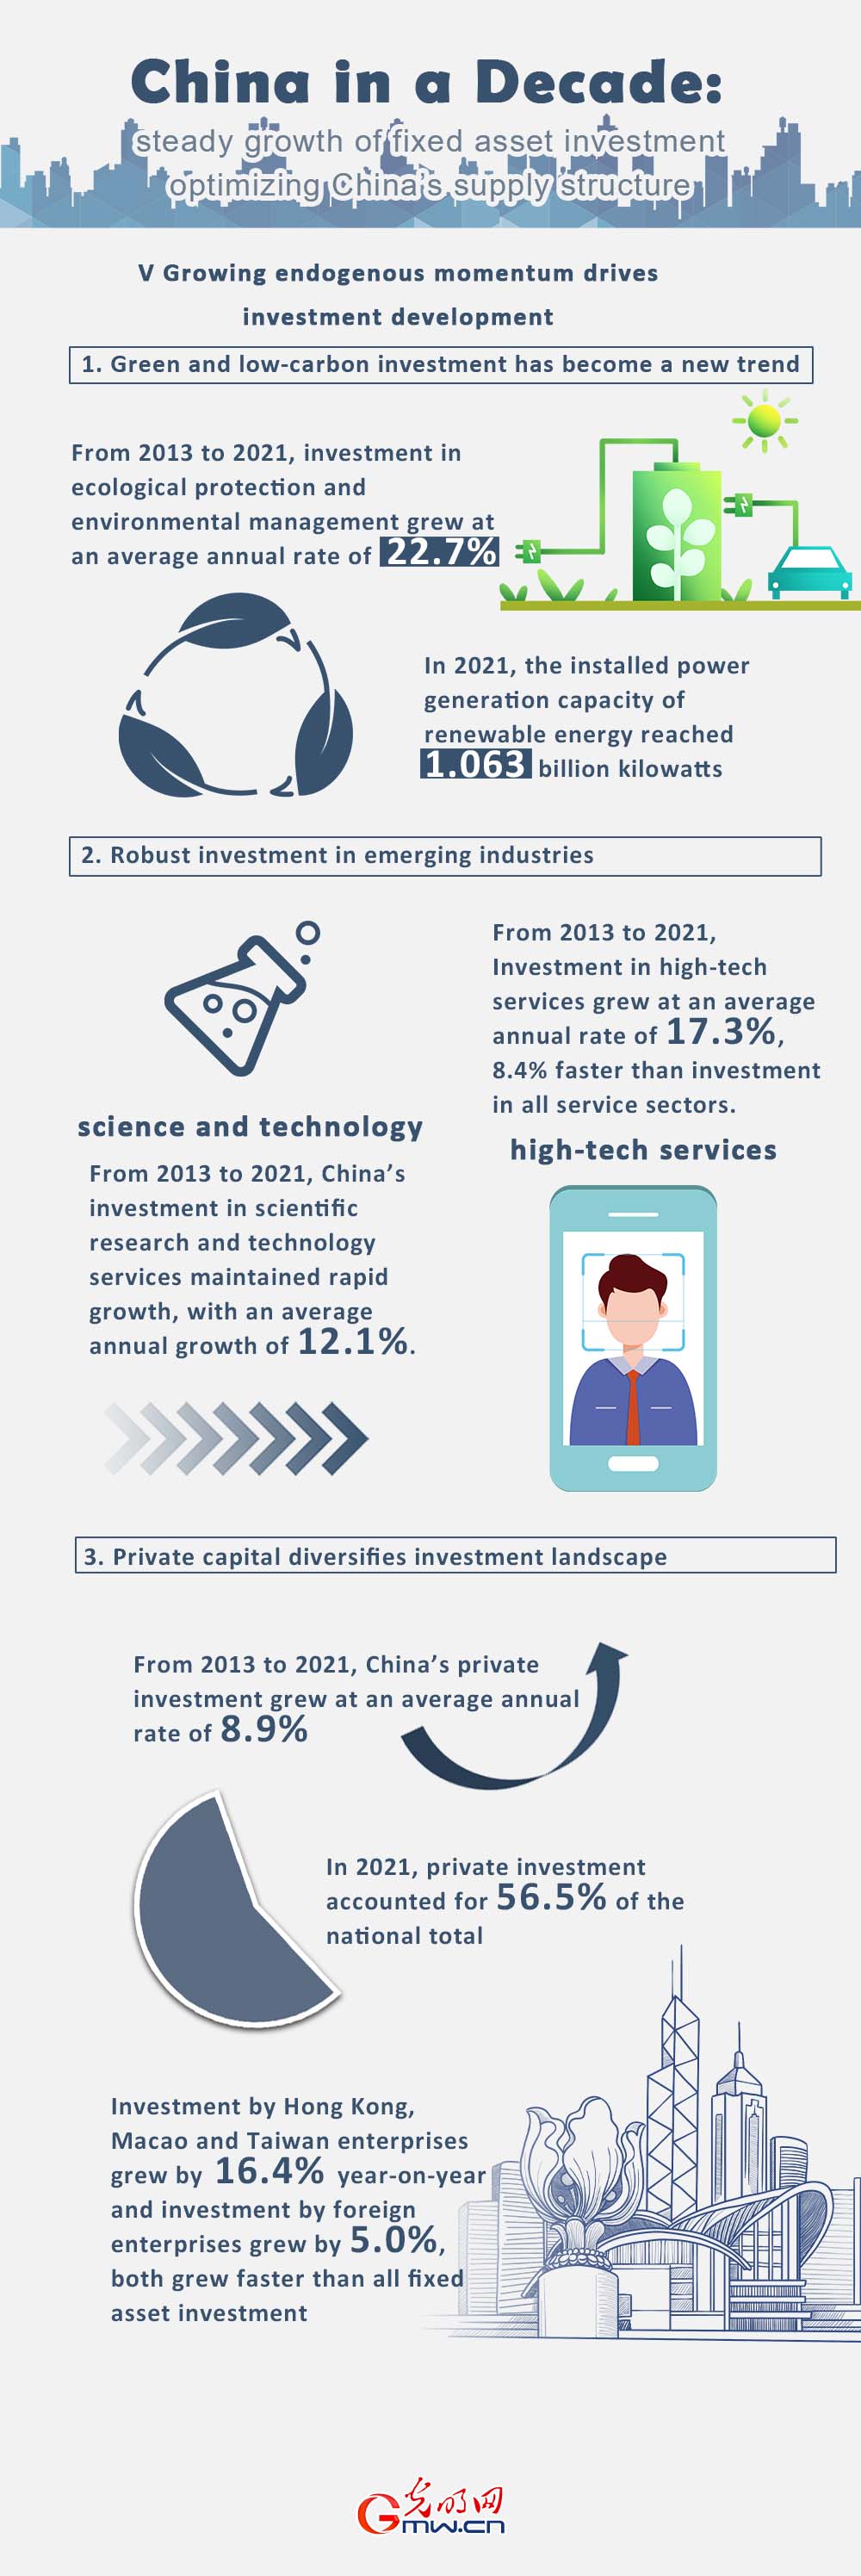 China in a Decade: Steady growth of fixed asset investment optimizing China’s supply structure